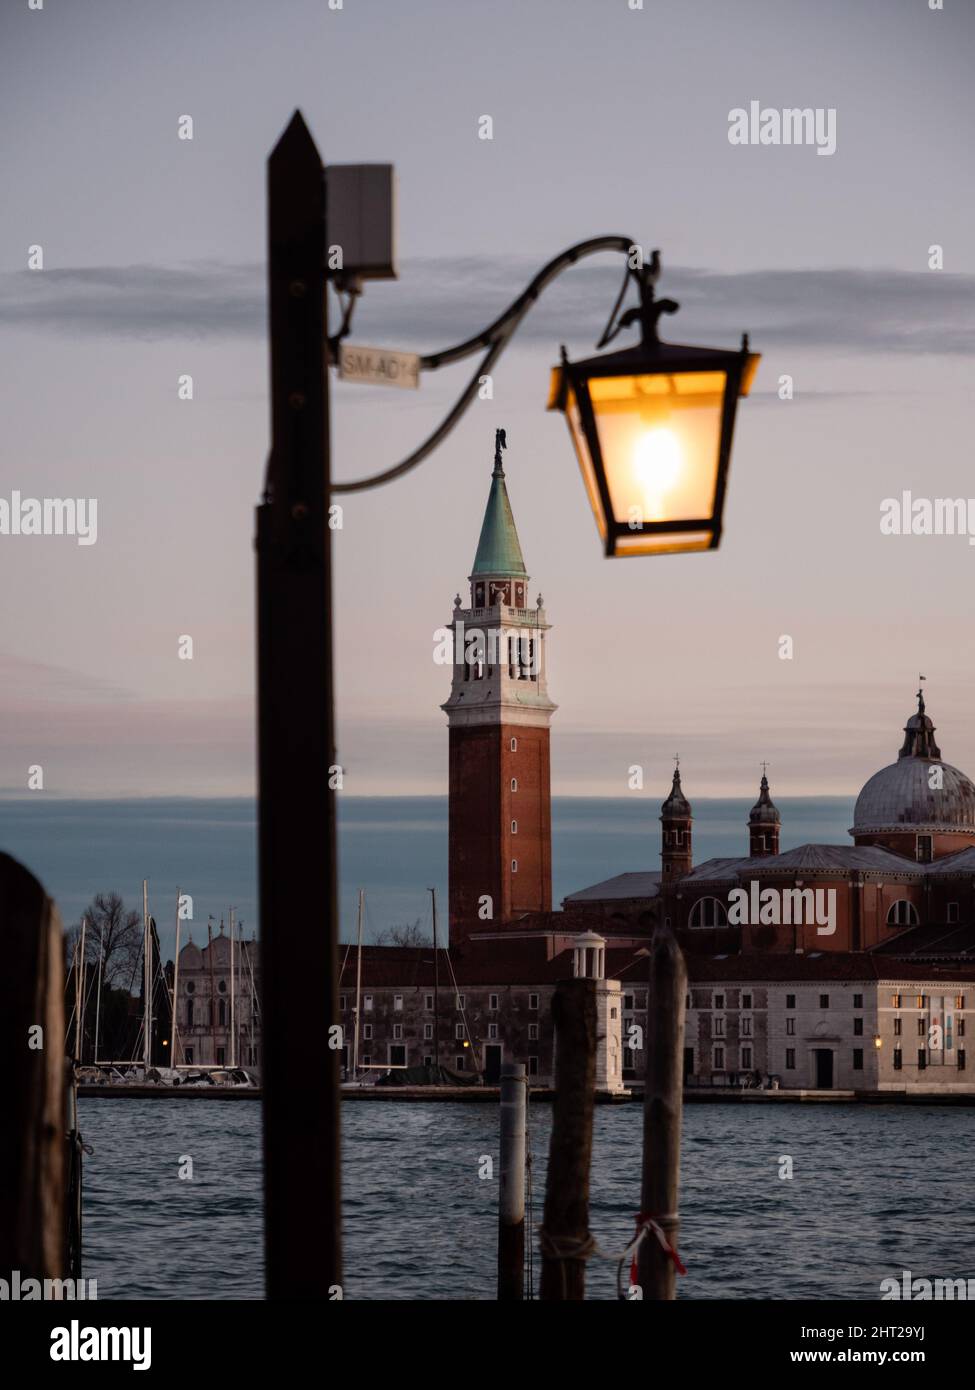 Campanile Bell Tower of San Giorgio Maggiore Church and Lantern at Dusk in the Evening Stock Photo